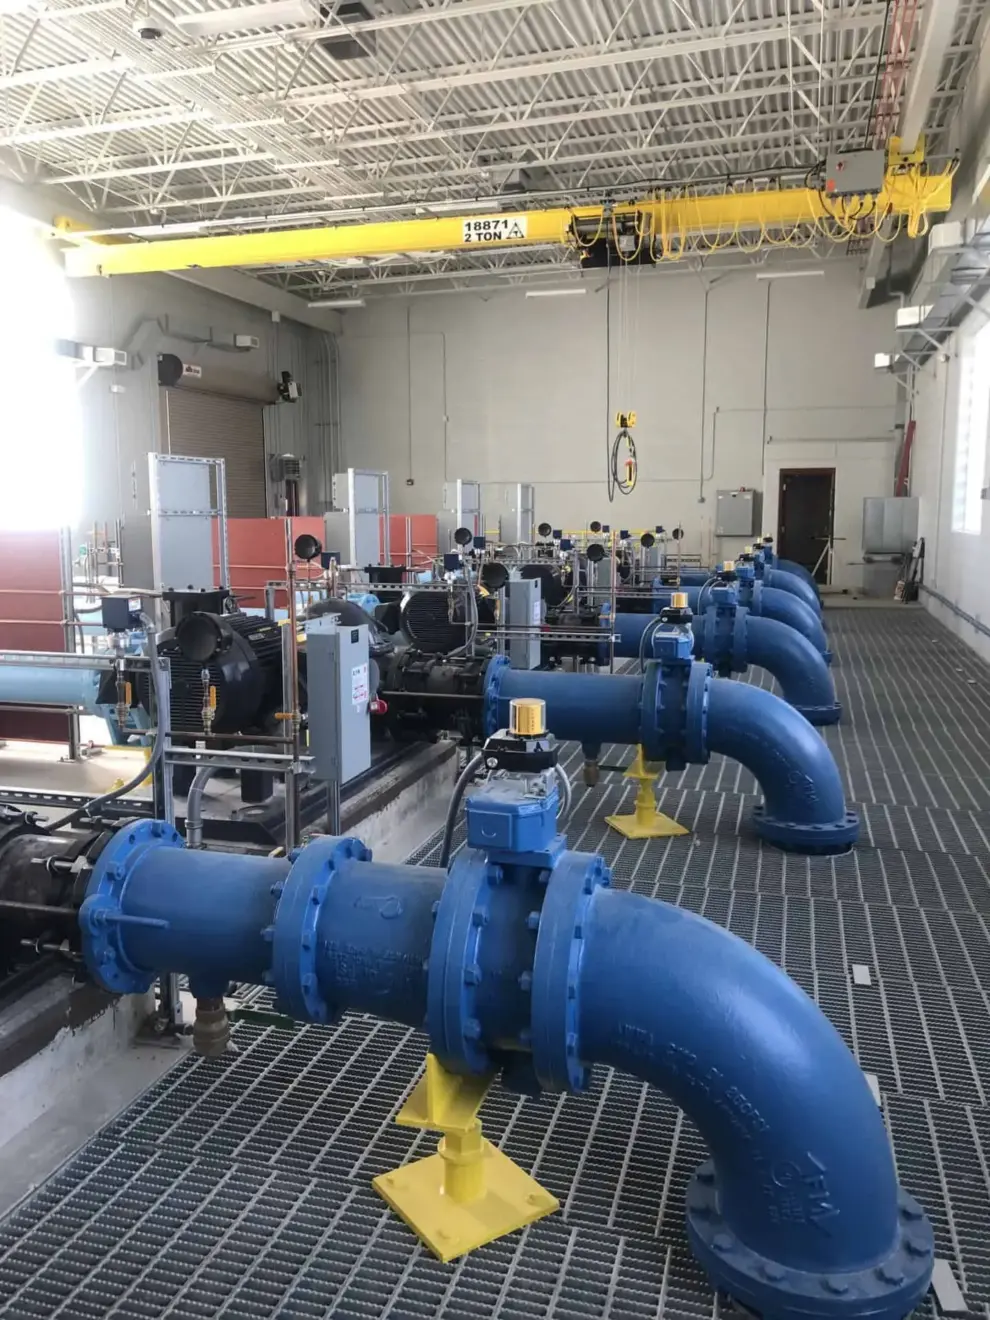 YEA 2021 – New Aurora Road Pump Station for the City of Cleveland Division of Water